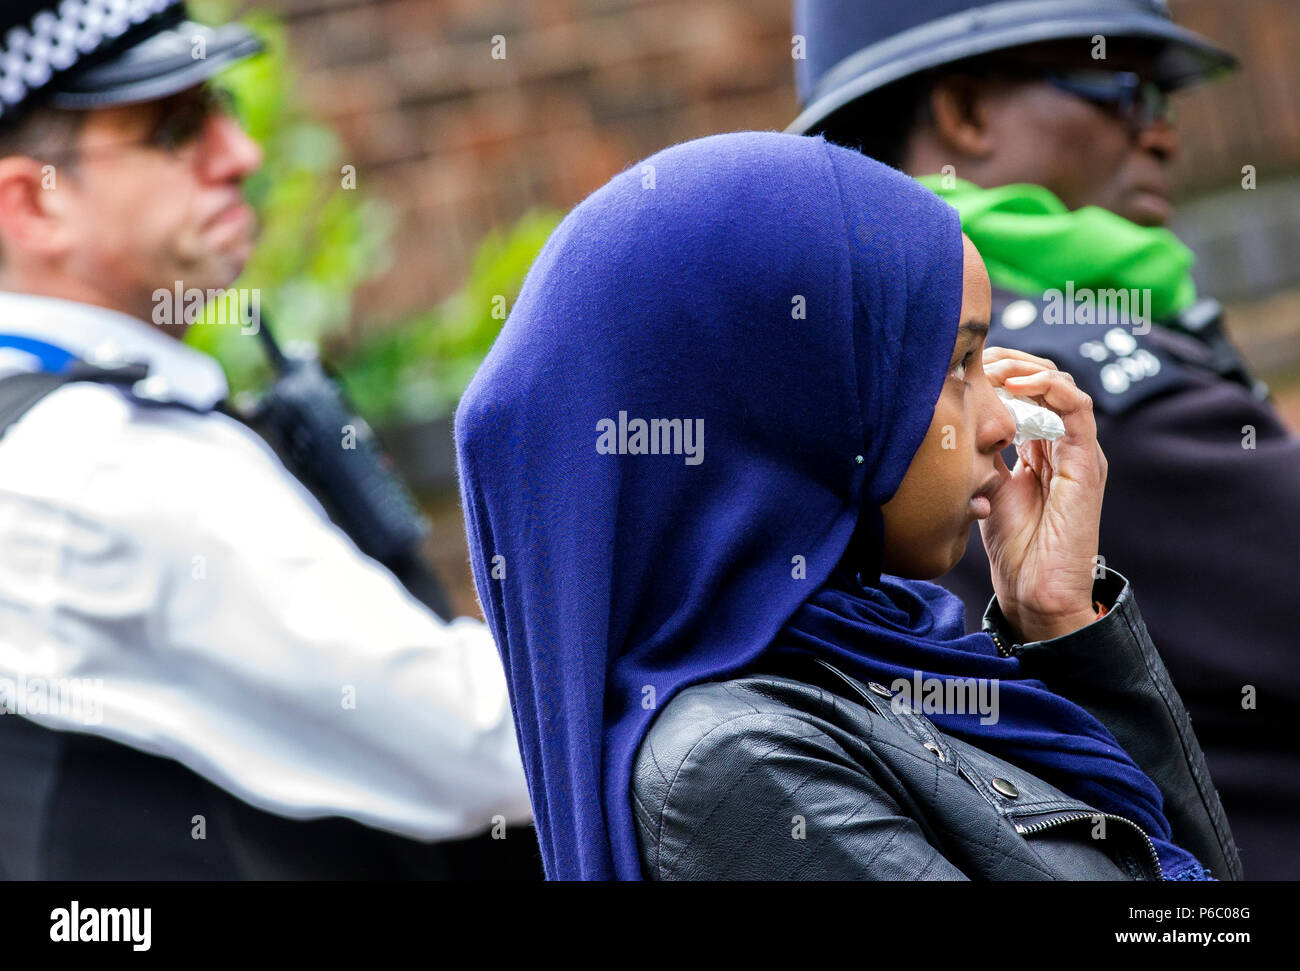 The first anniversary of the 24-storey Grenfell Tower block of public housing flats fire which claimed 72 lives. Young female wipes tears away during the public memorial service, South Kensington, London, UK, 14th June 2018. Stock Photo